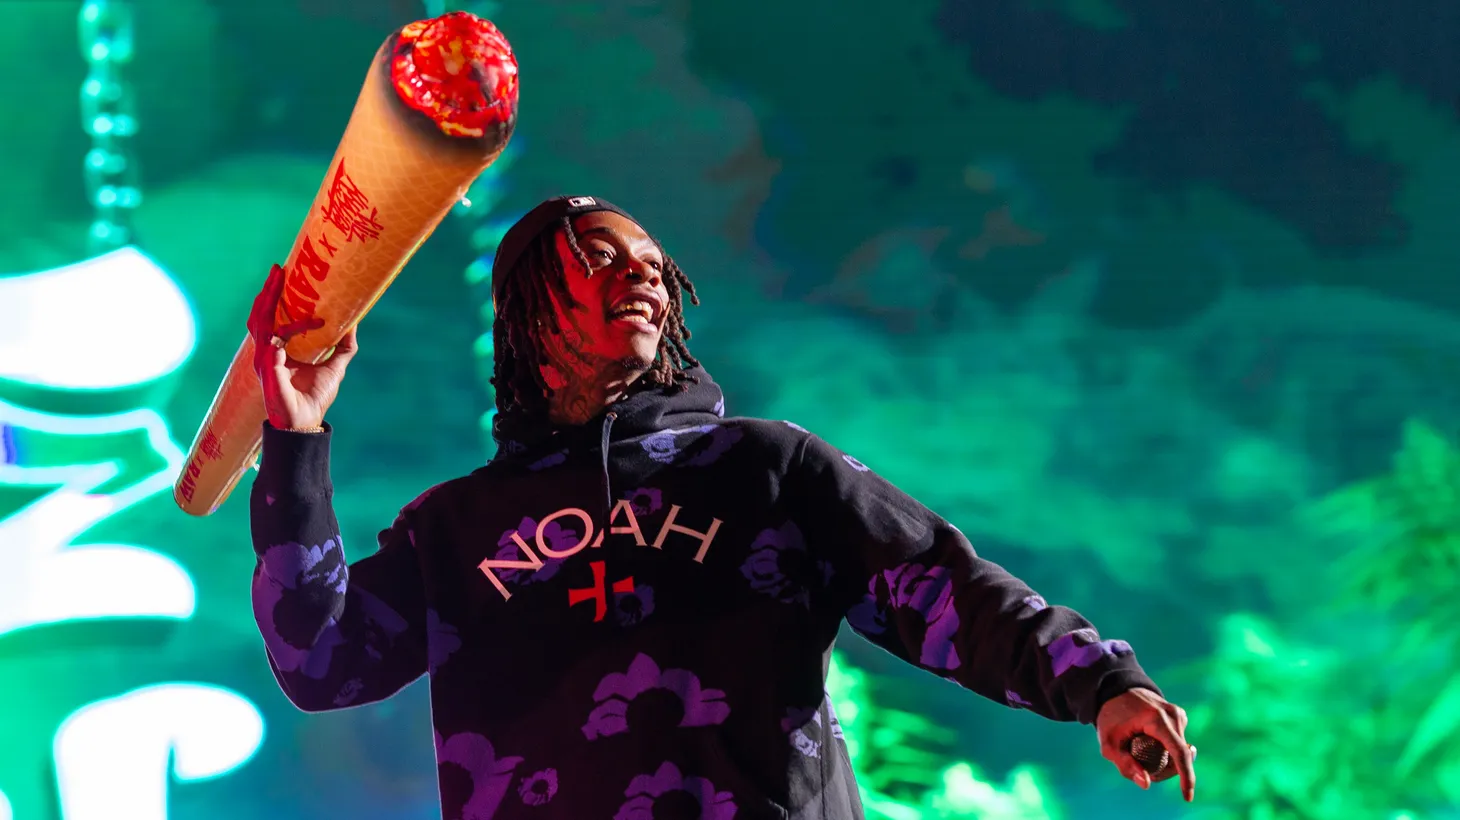 Rapper Wiz Khalifa holds a blow-up joint during a performance. “[Celebrities] already have built in followers and a fan base that drives brand awareness. That's a big deal in the cannabis space,” says Leafly Senior Editor David Downs.